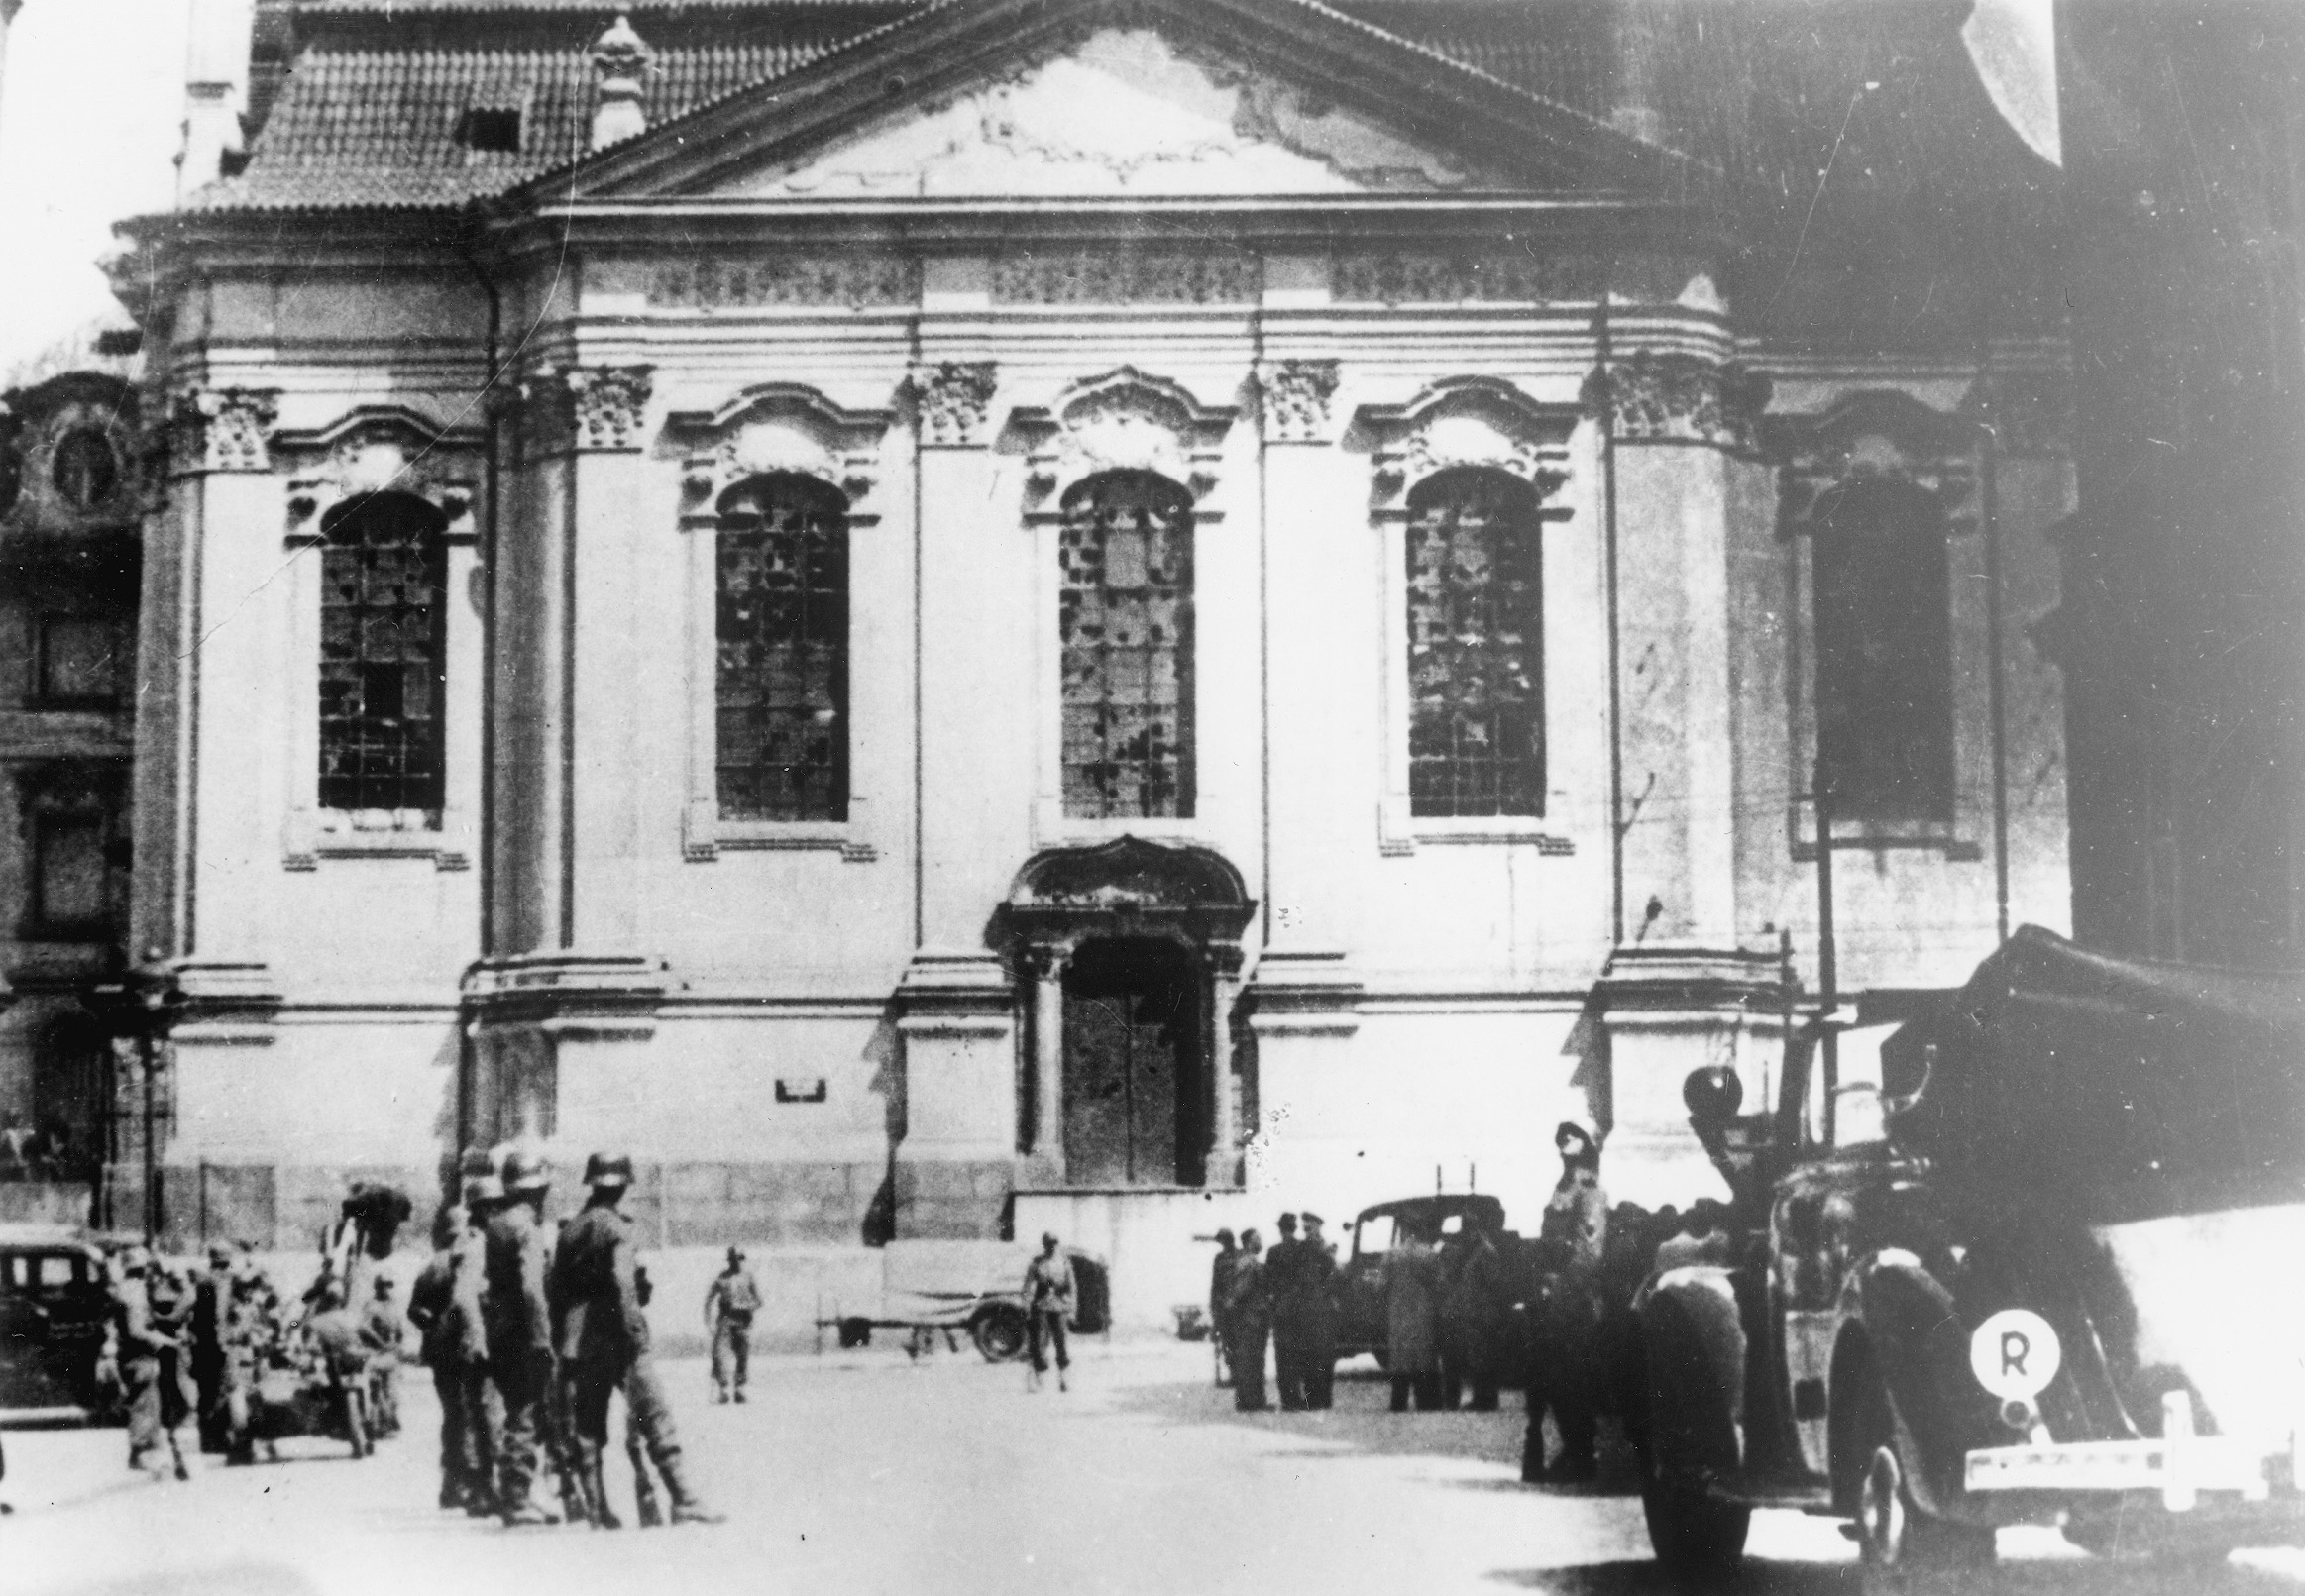 German soldiers surround the Church of St. Cyril and St. Methodus in Prague where they have cornered eight Czech parachutists linked to the assassination of Heydrich.